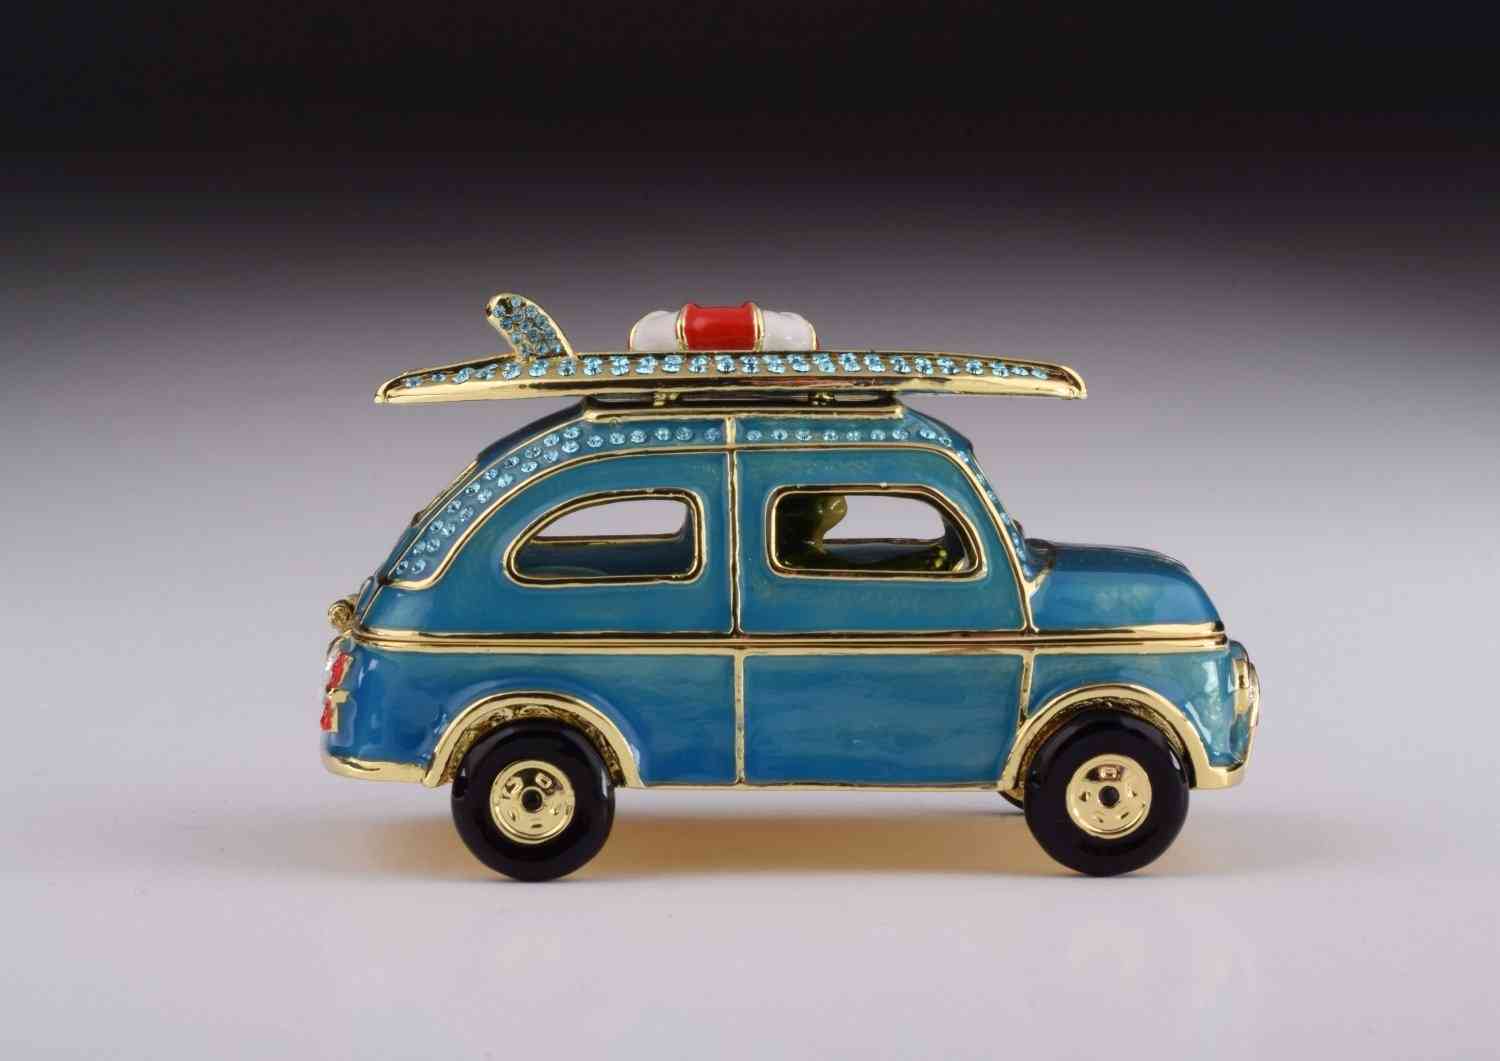 Blue Surfing Car With Surfboard - Trinket Box